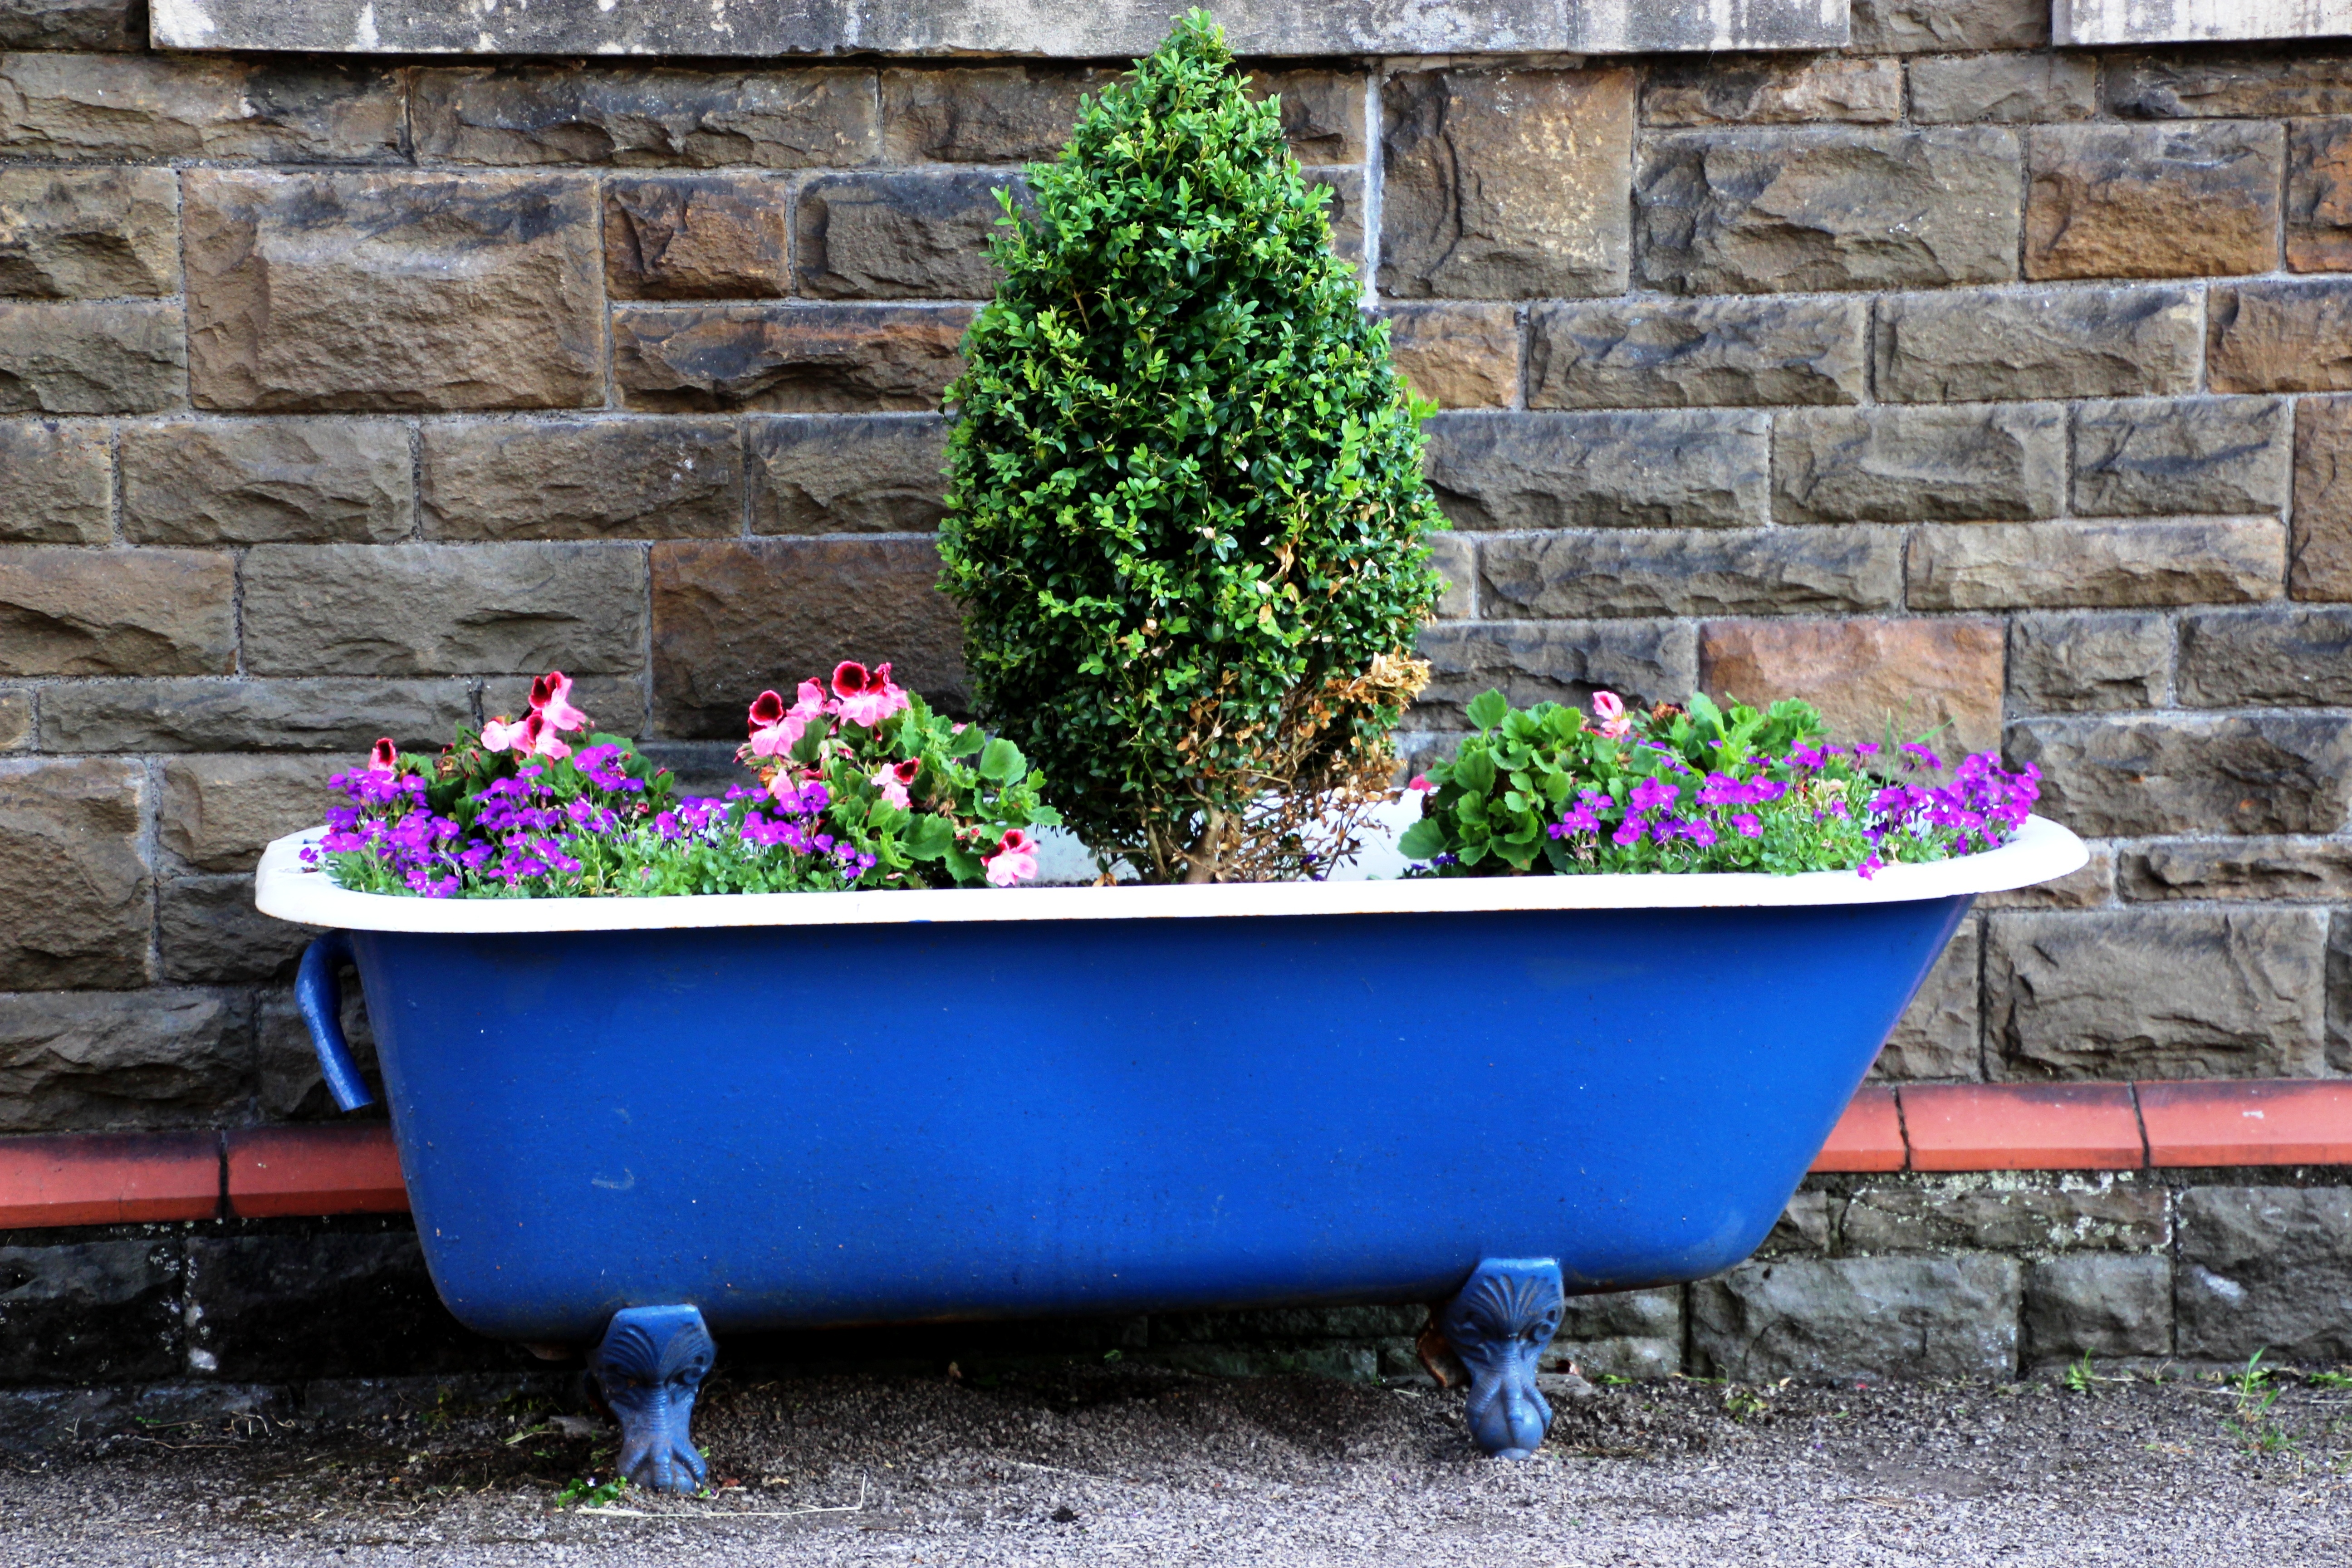 Photograph of flowers and a small tree planted in a blue bathtub.